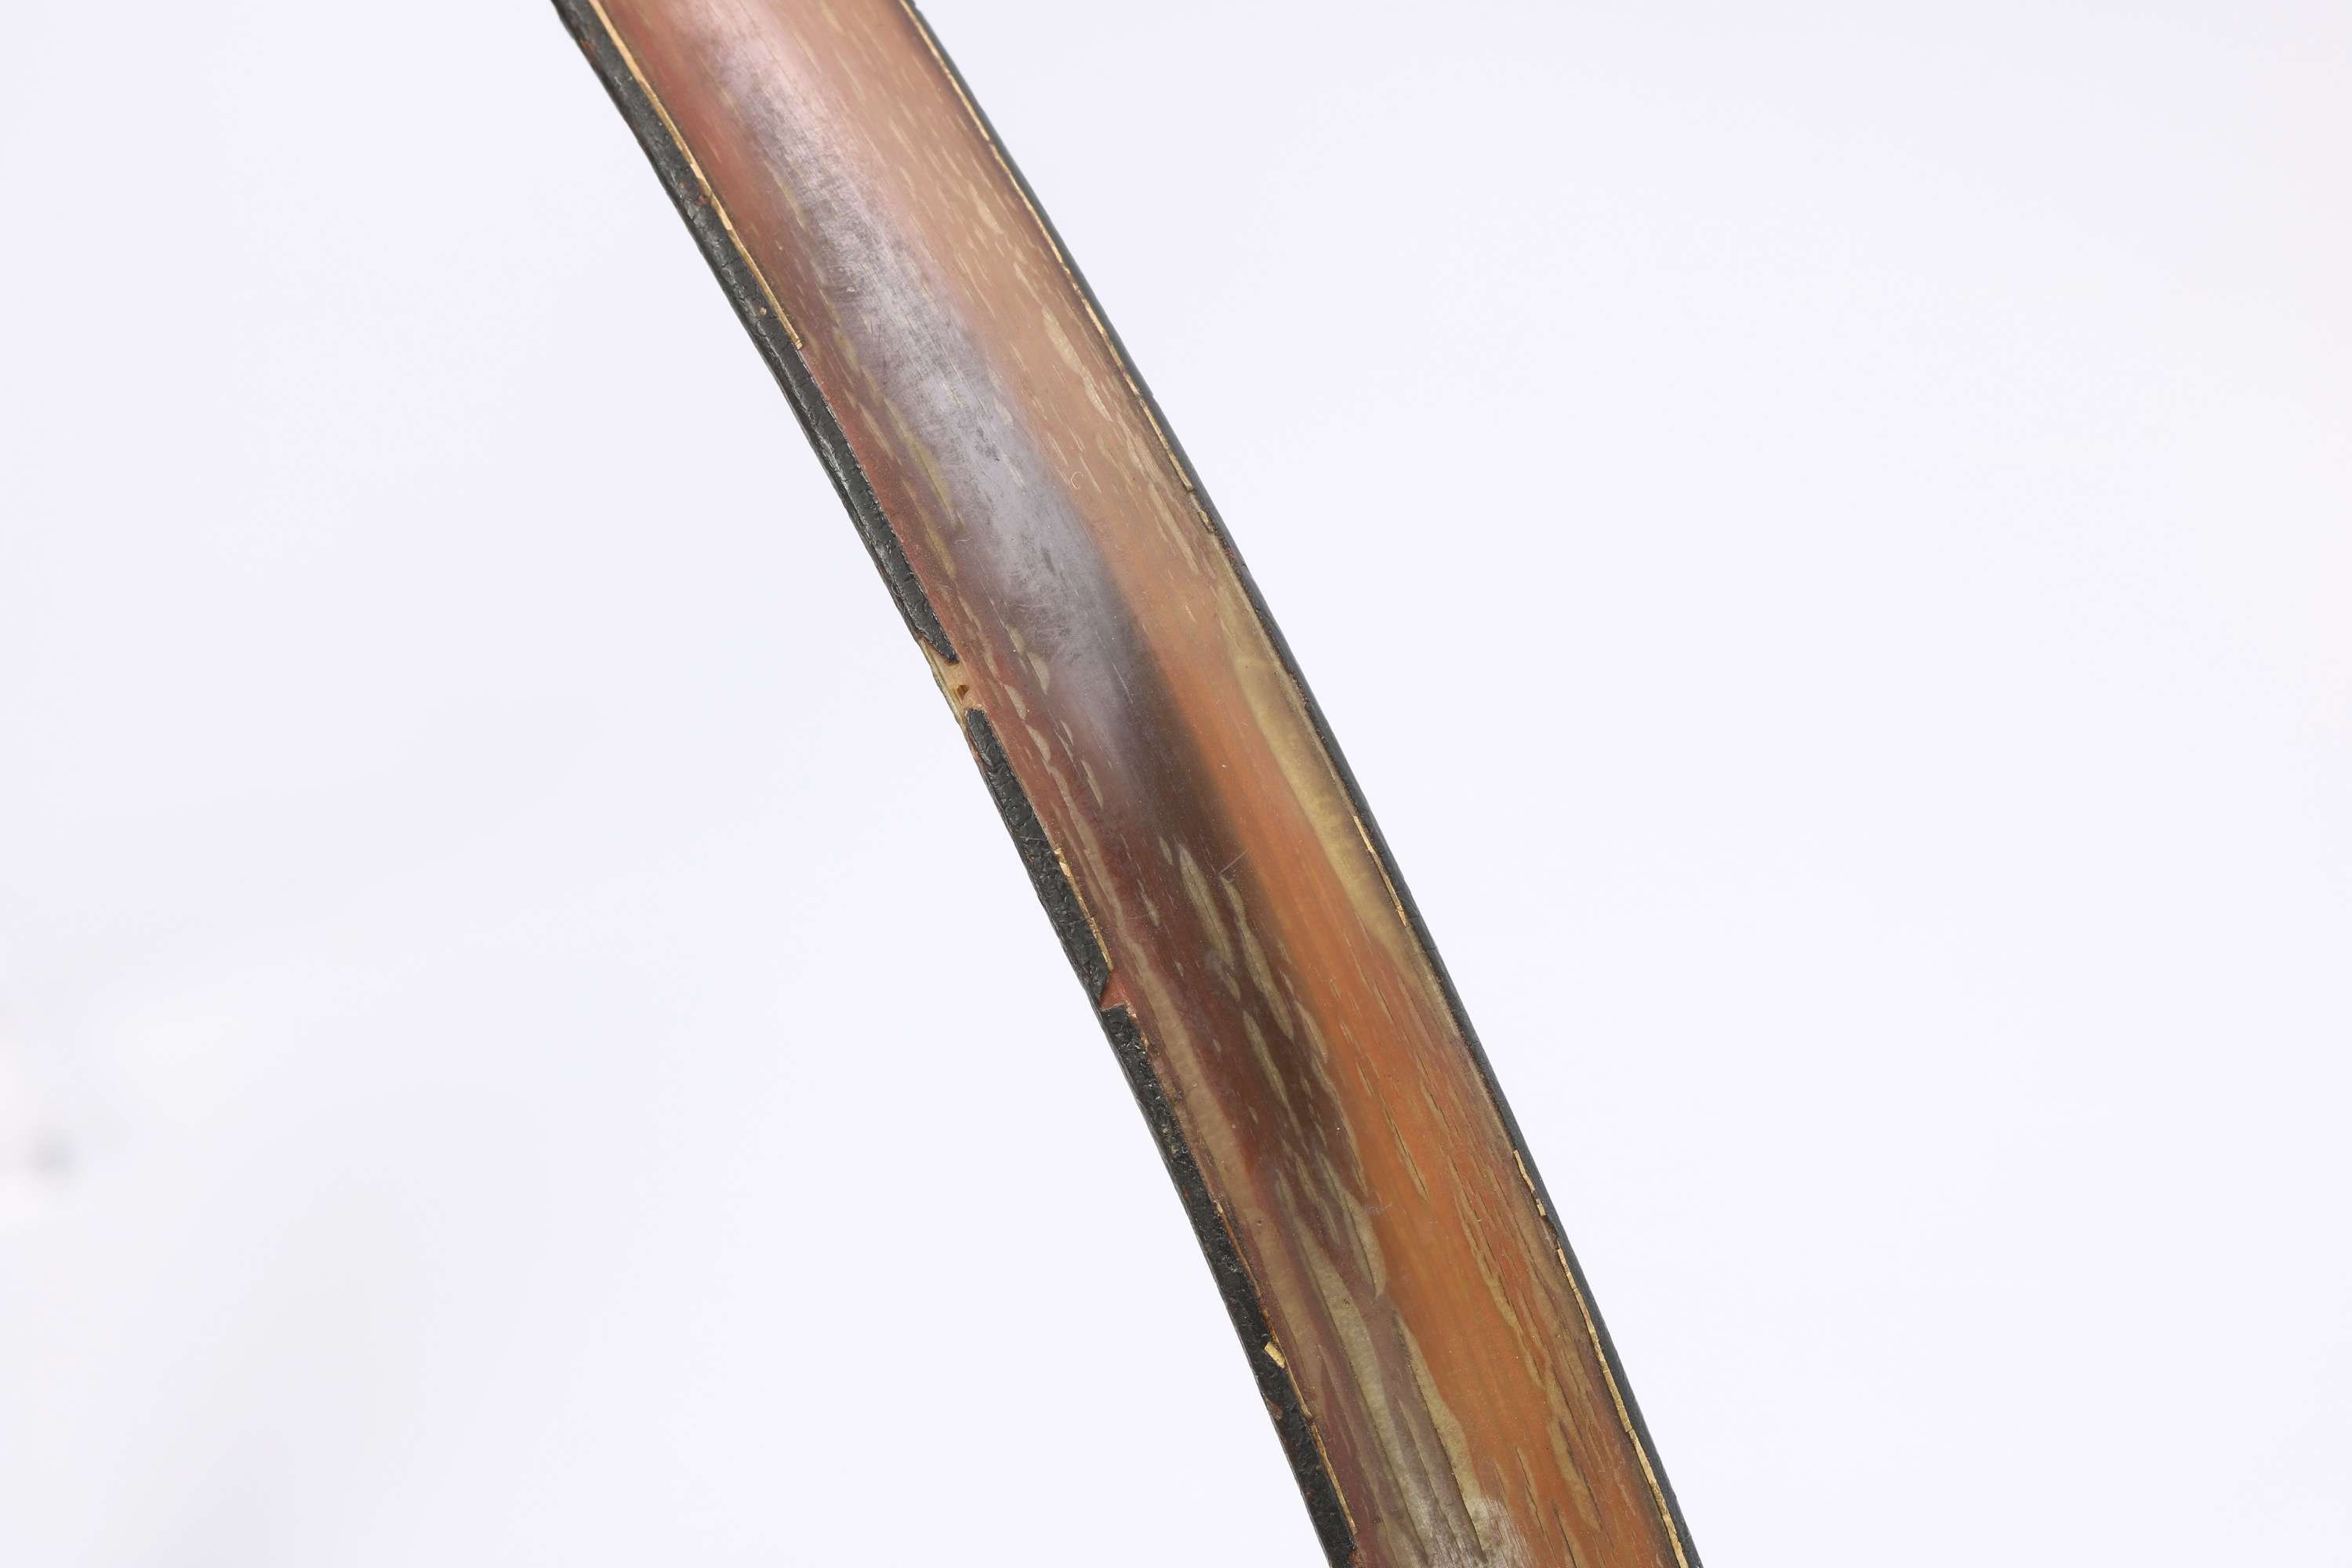 Manchu horn bow with red bellies